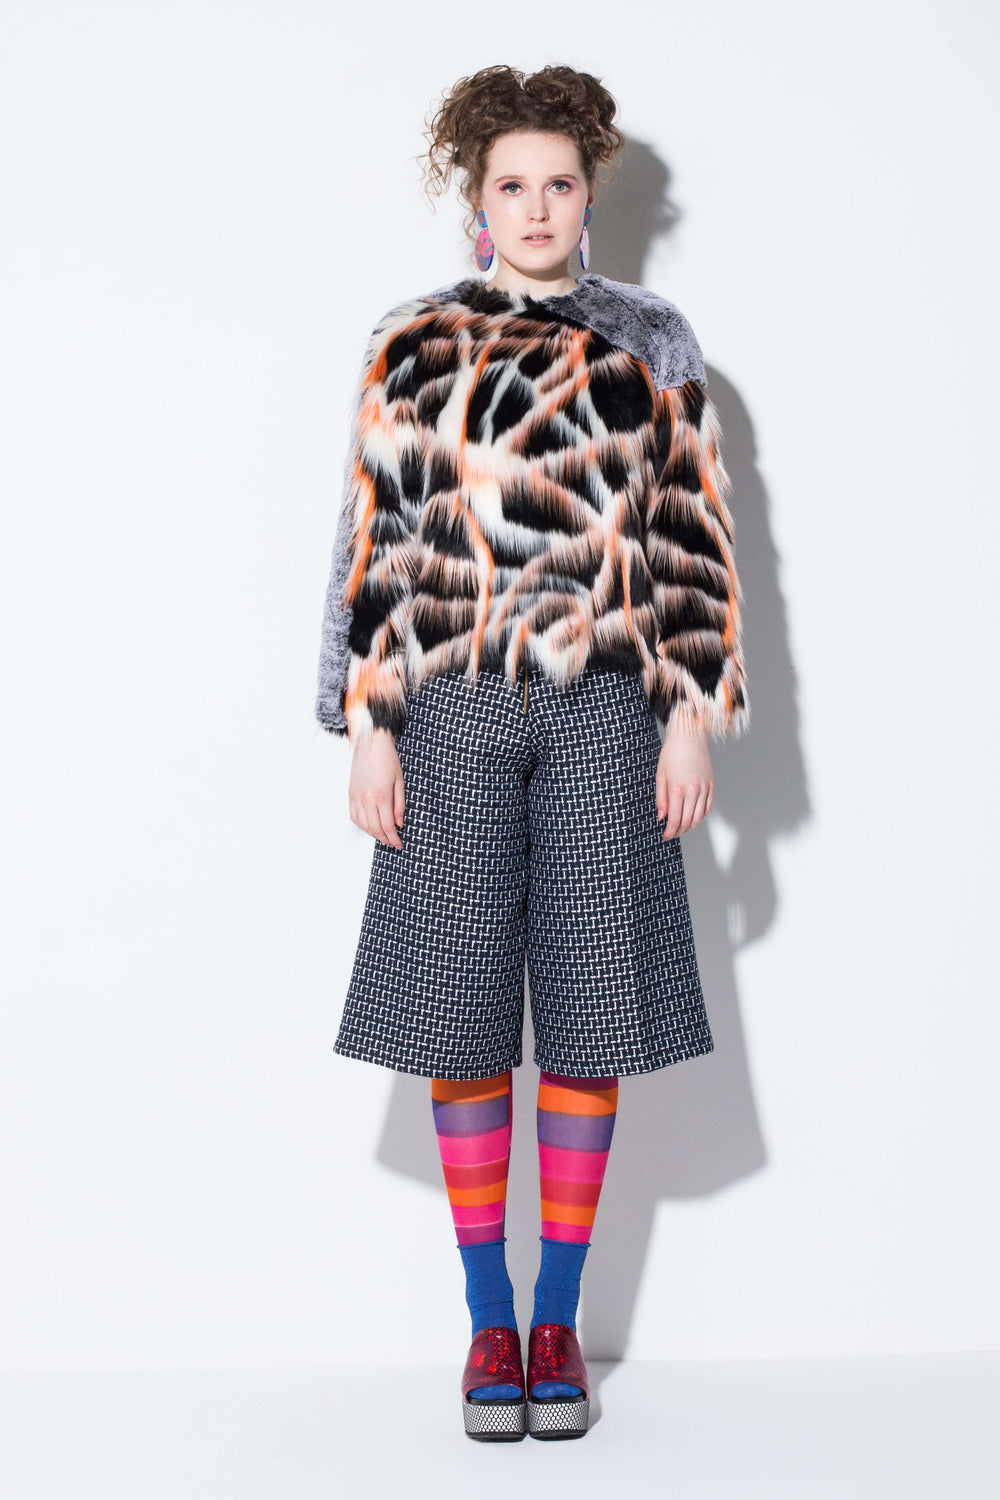 free spirit| a fun faux fur top in flash orange and grey colour block from jin & yin front view